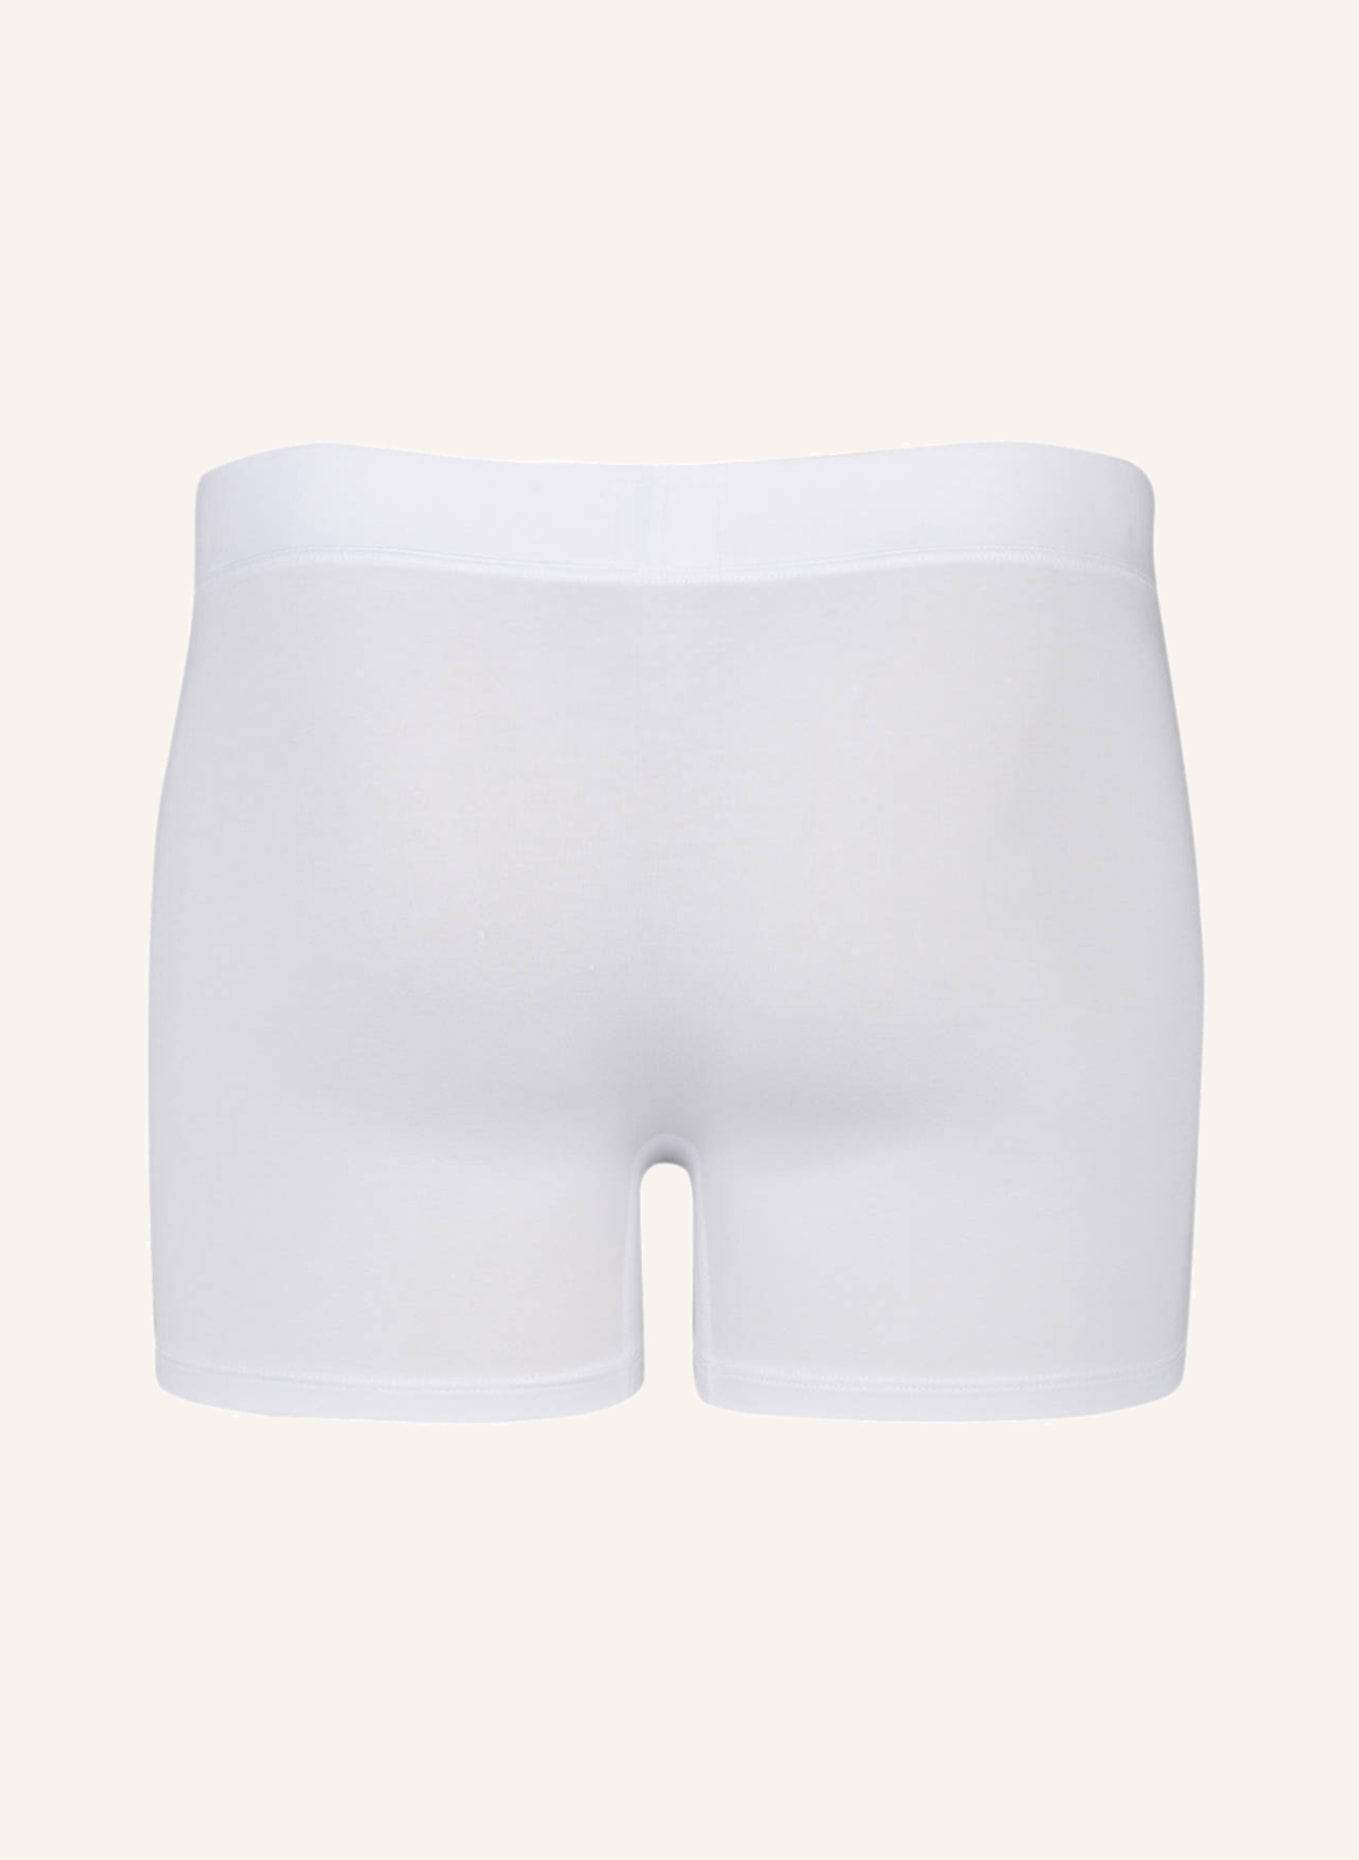 SCHIESSER Boxer shorts LONG LIFE SOFT, Color: WHITE (Image 2)